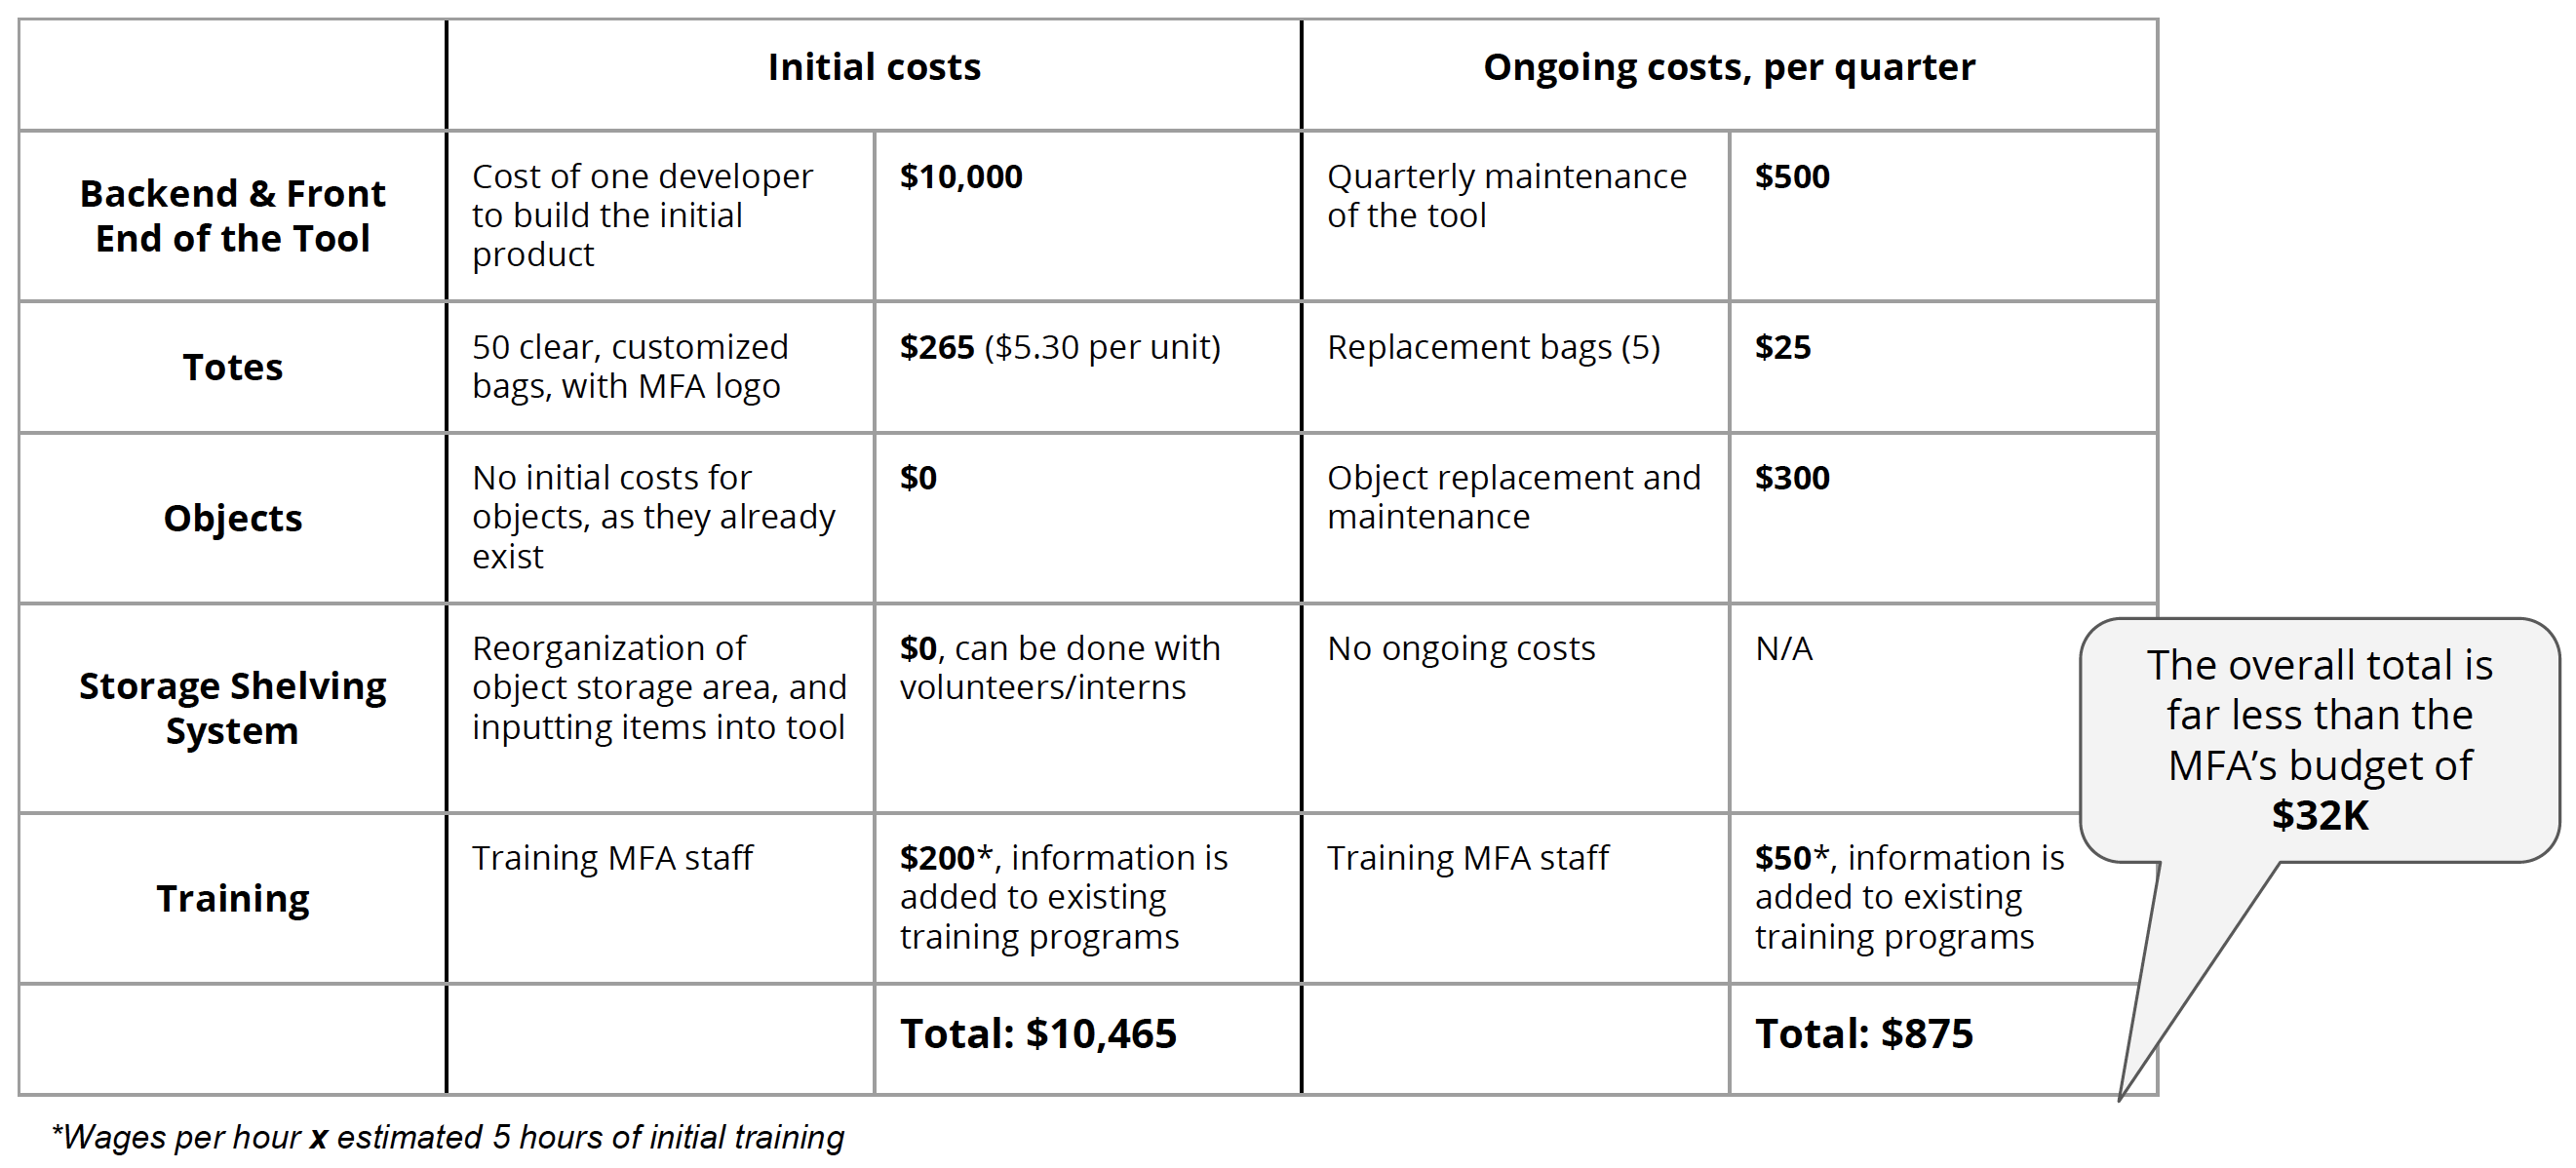 Table detailing overall costs of project, which end up being 31 thousand dollars less than the budget at 875 US dollars.